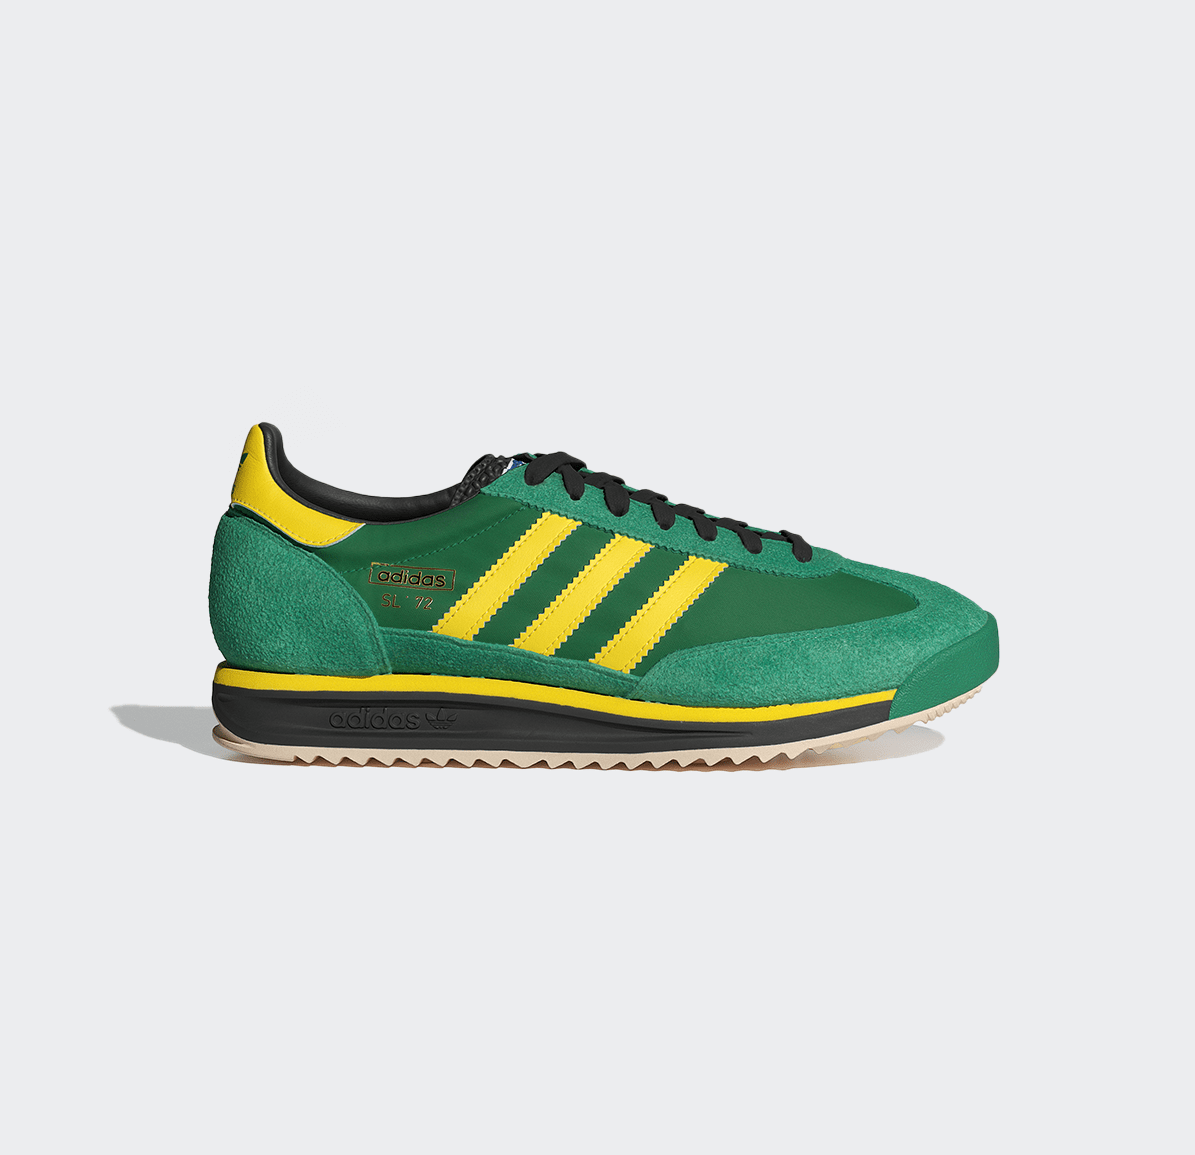 Adidas SL 72 RS - Green/Yellow/Core Black - Adidas - State Of Play